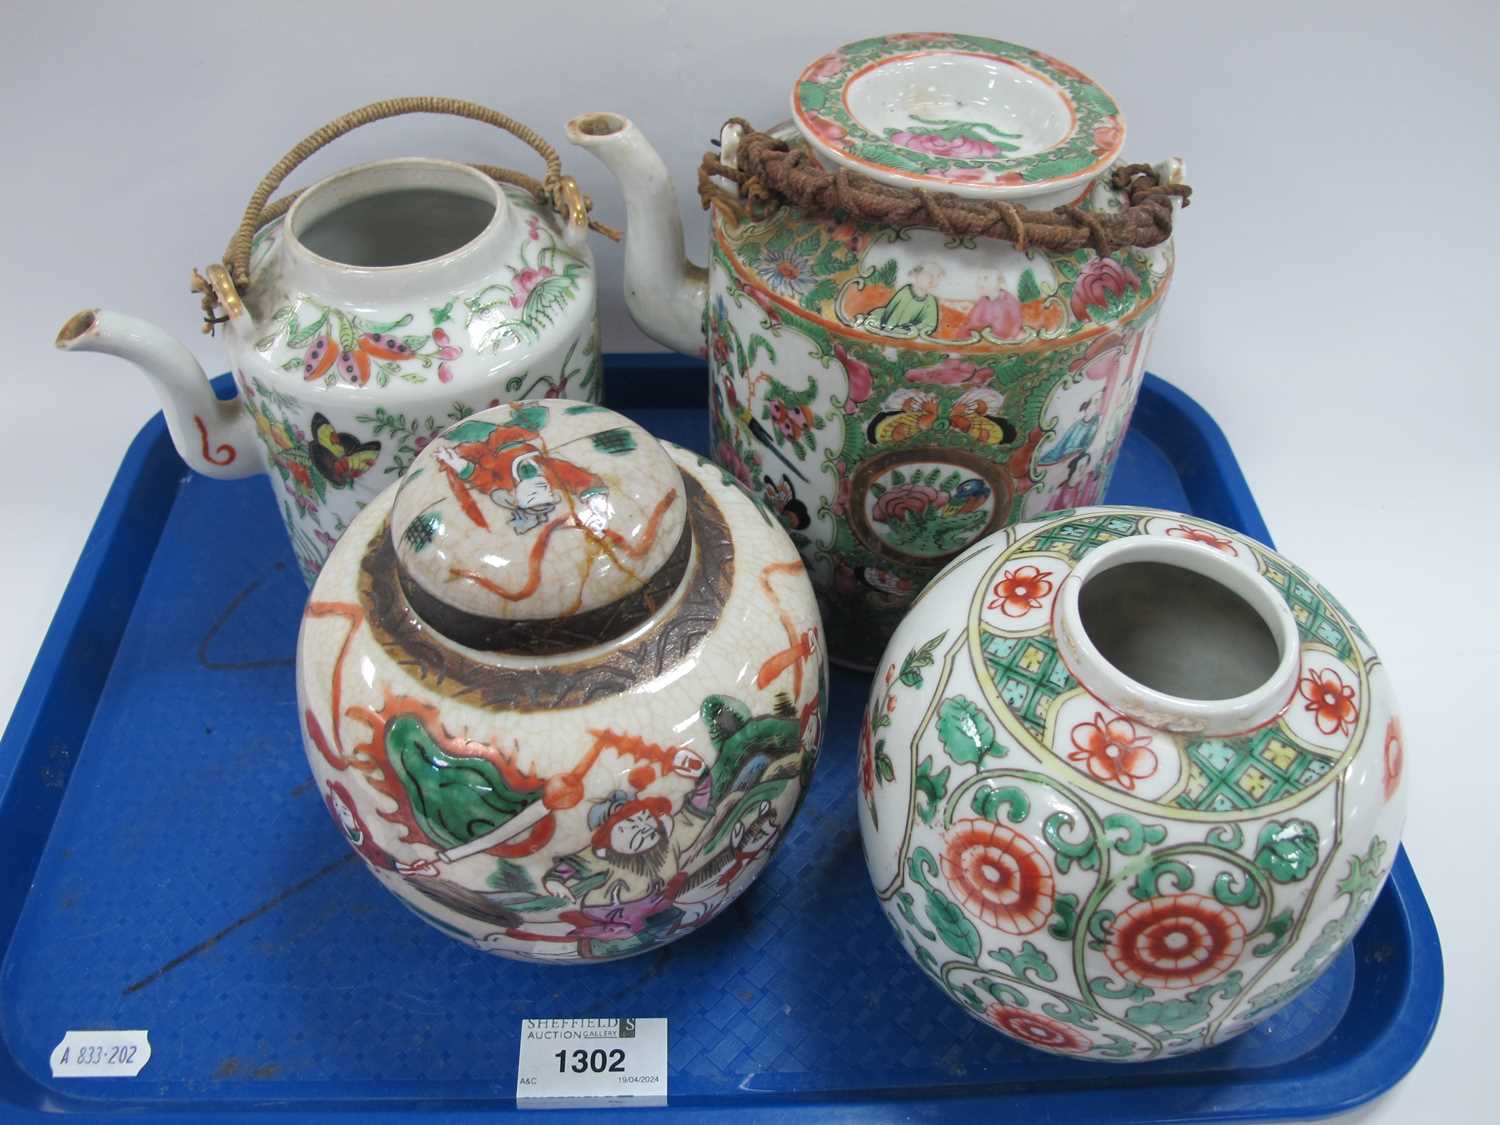 XIX Century Chinese Cantonese Tea Pot, Japanese ginger jar, etc:- One Tray Teapot with some rough